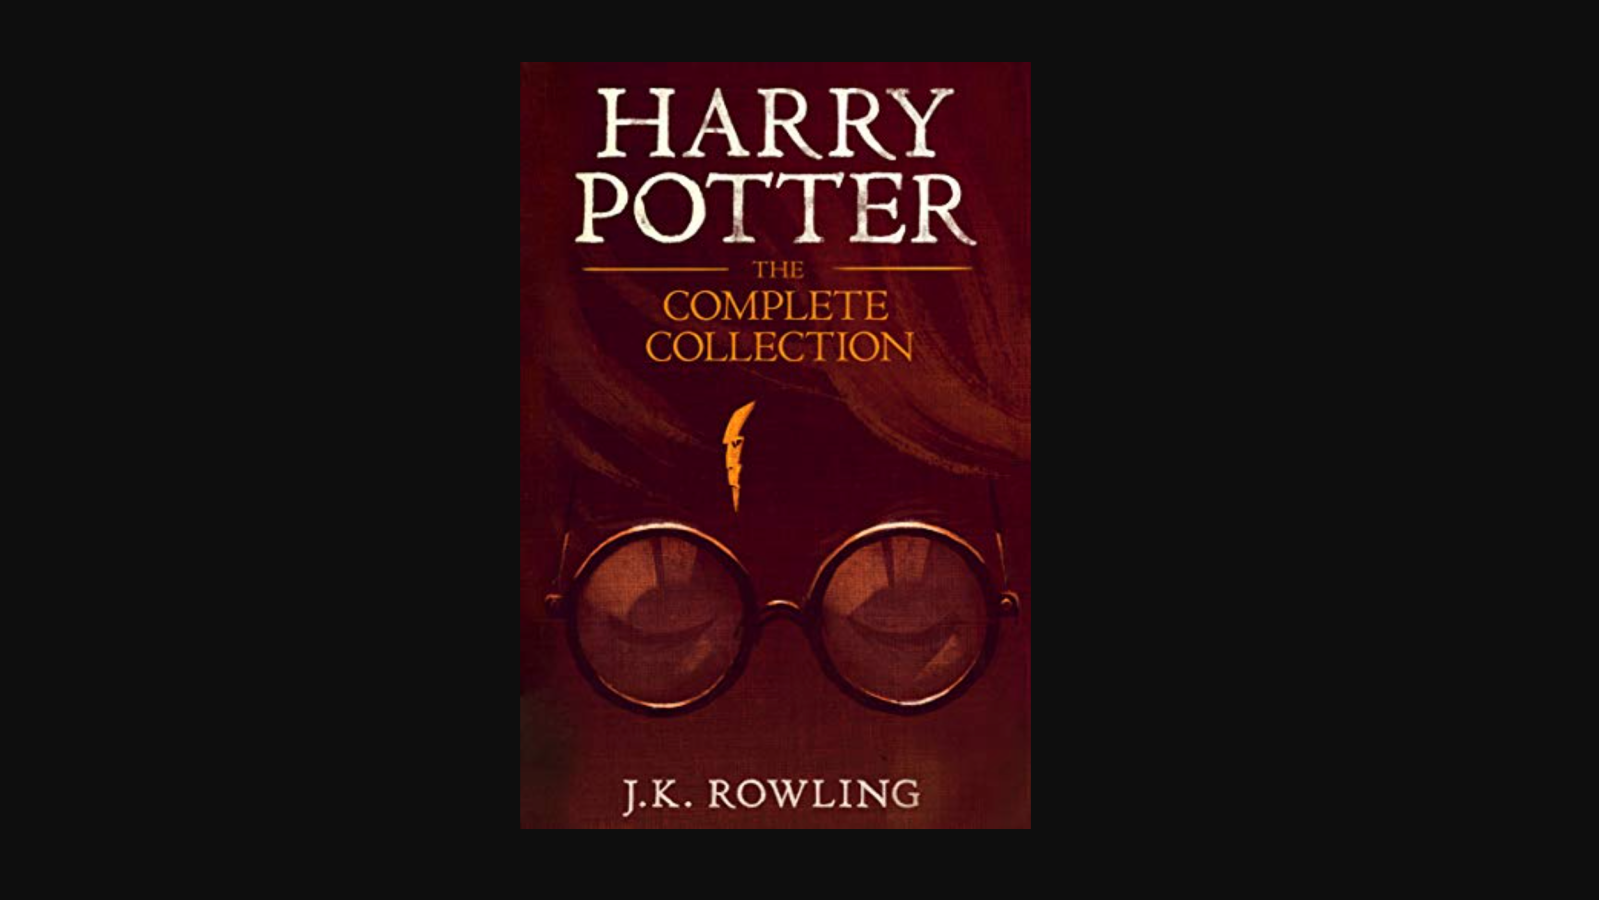 Can I read the Harry Potter books on my e-reader or tablet? 2